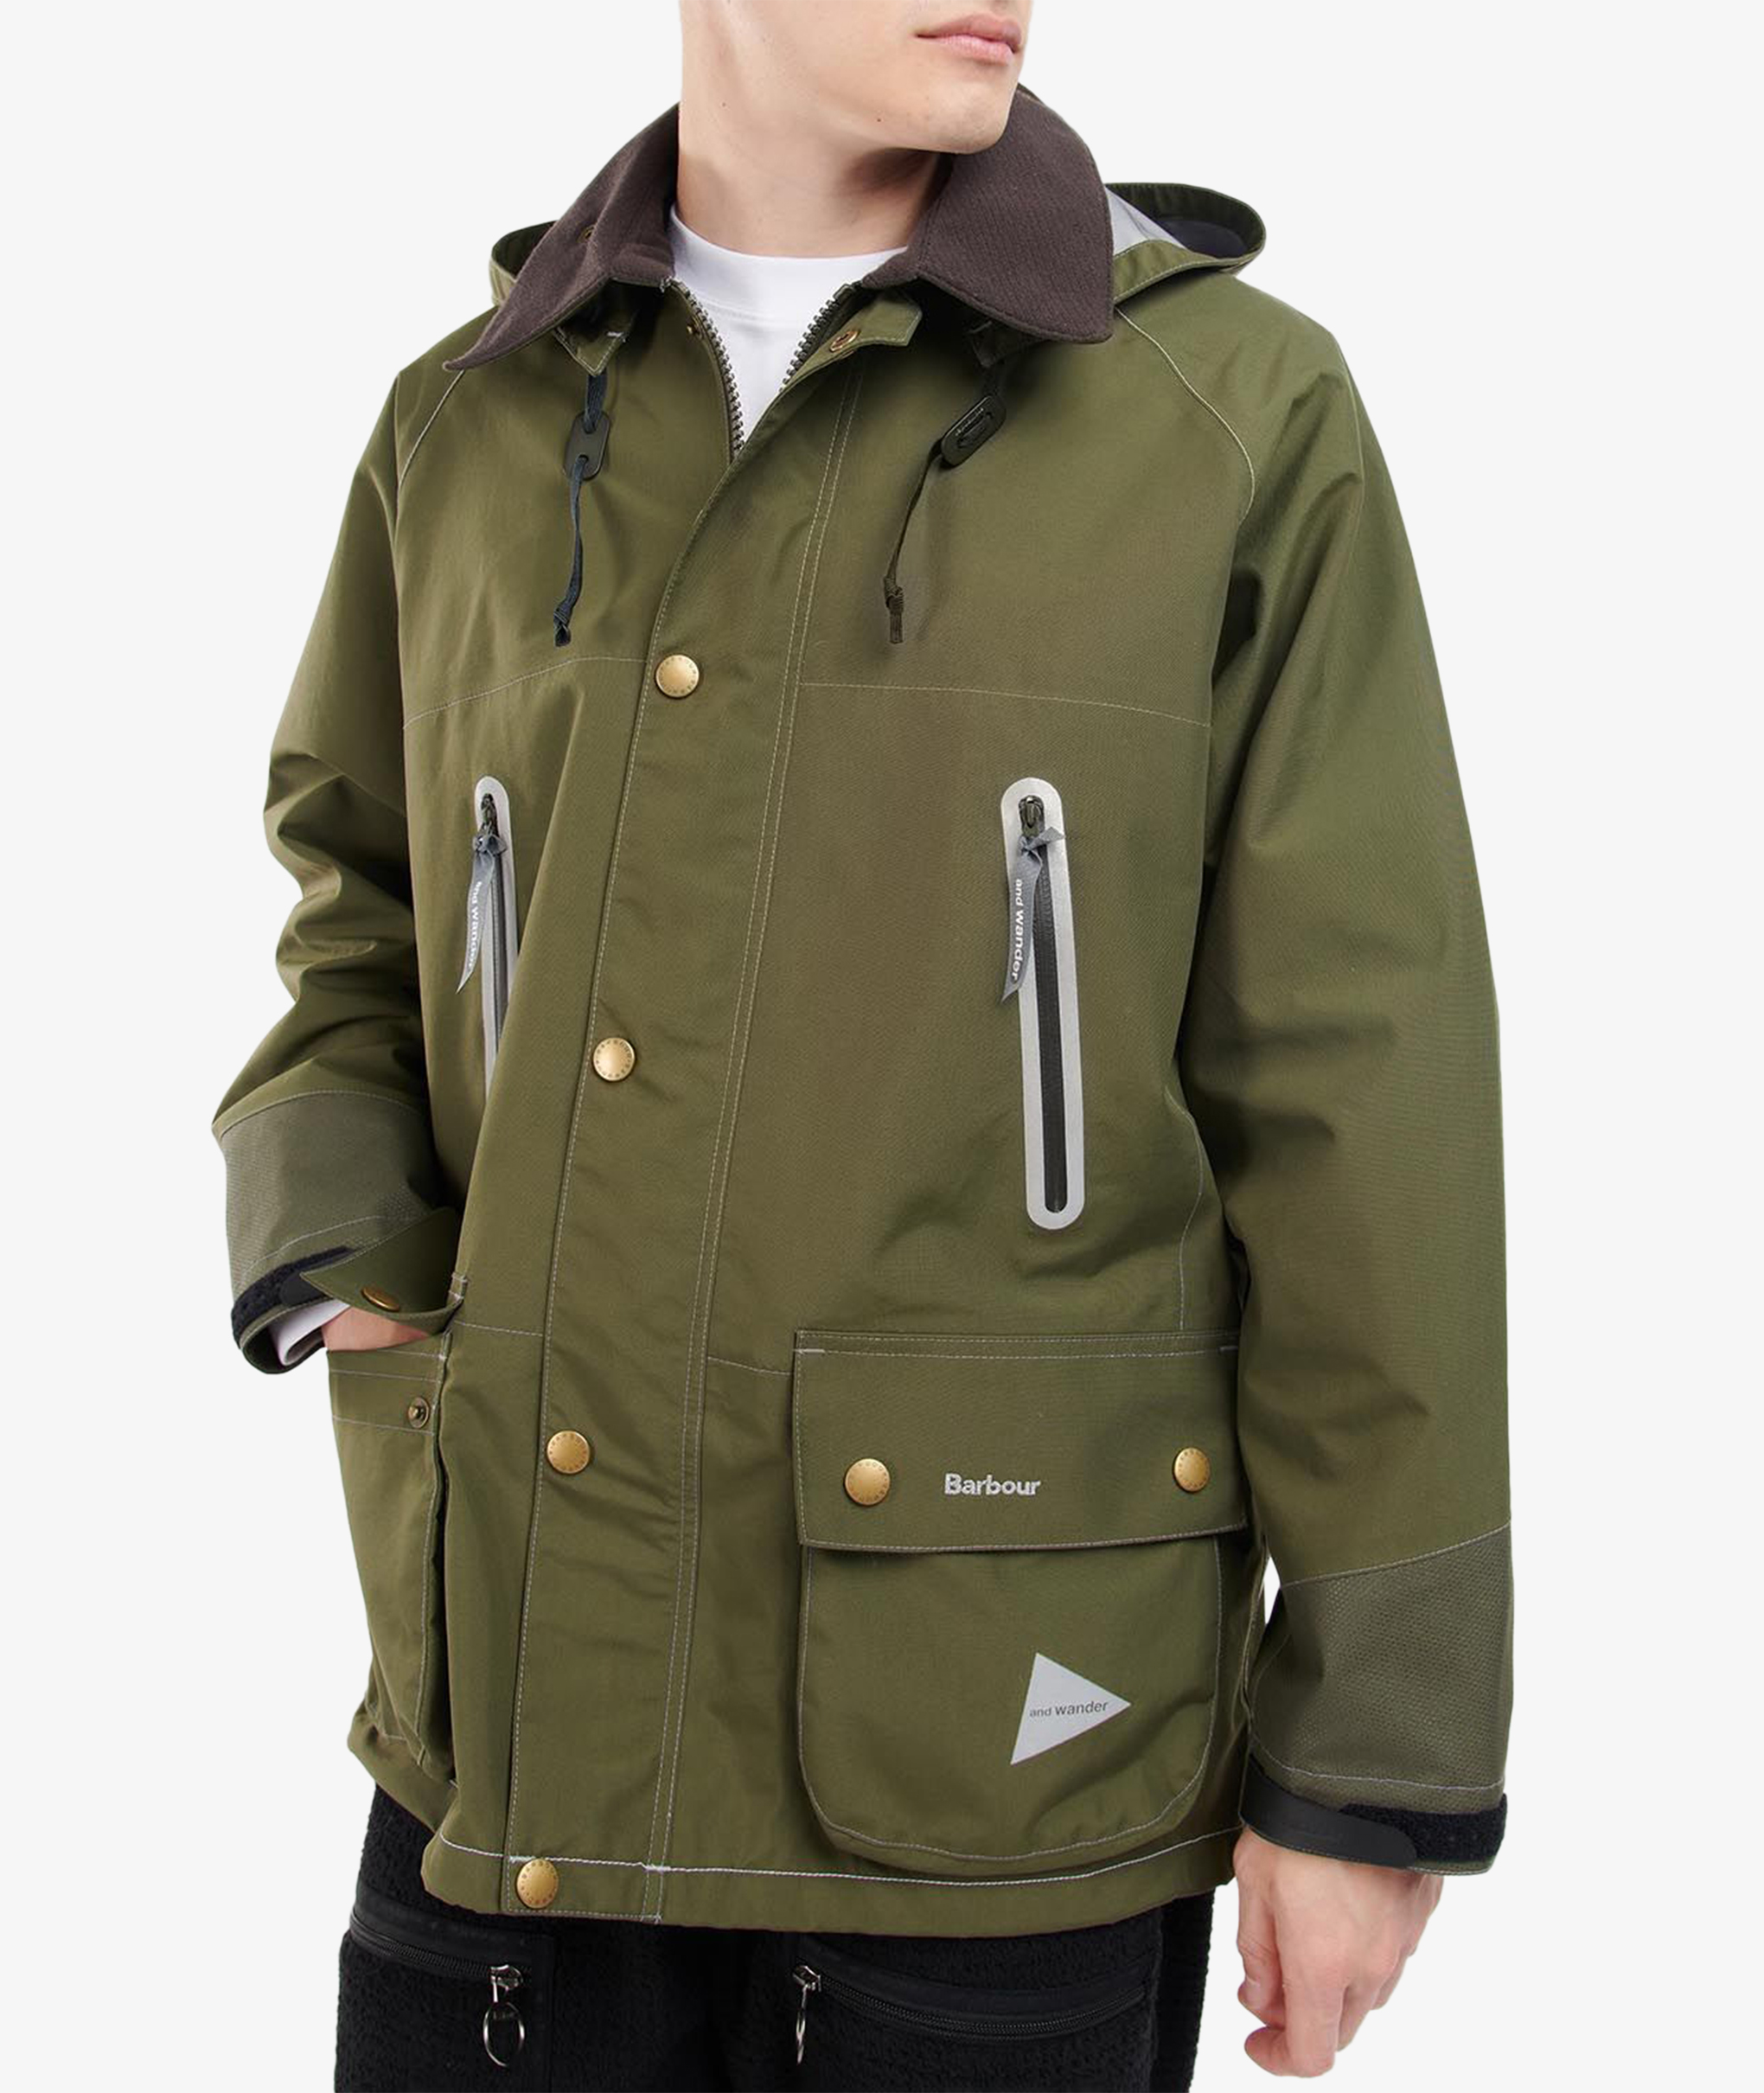 Norse Store | Shipping Worldwide - Barbour Barbour And Wander 3L